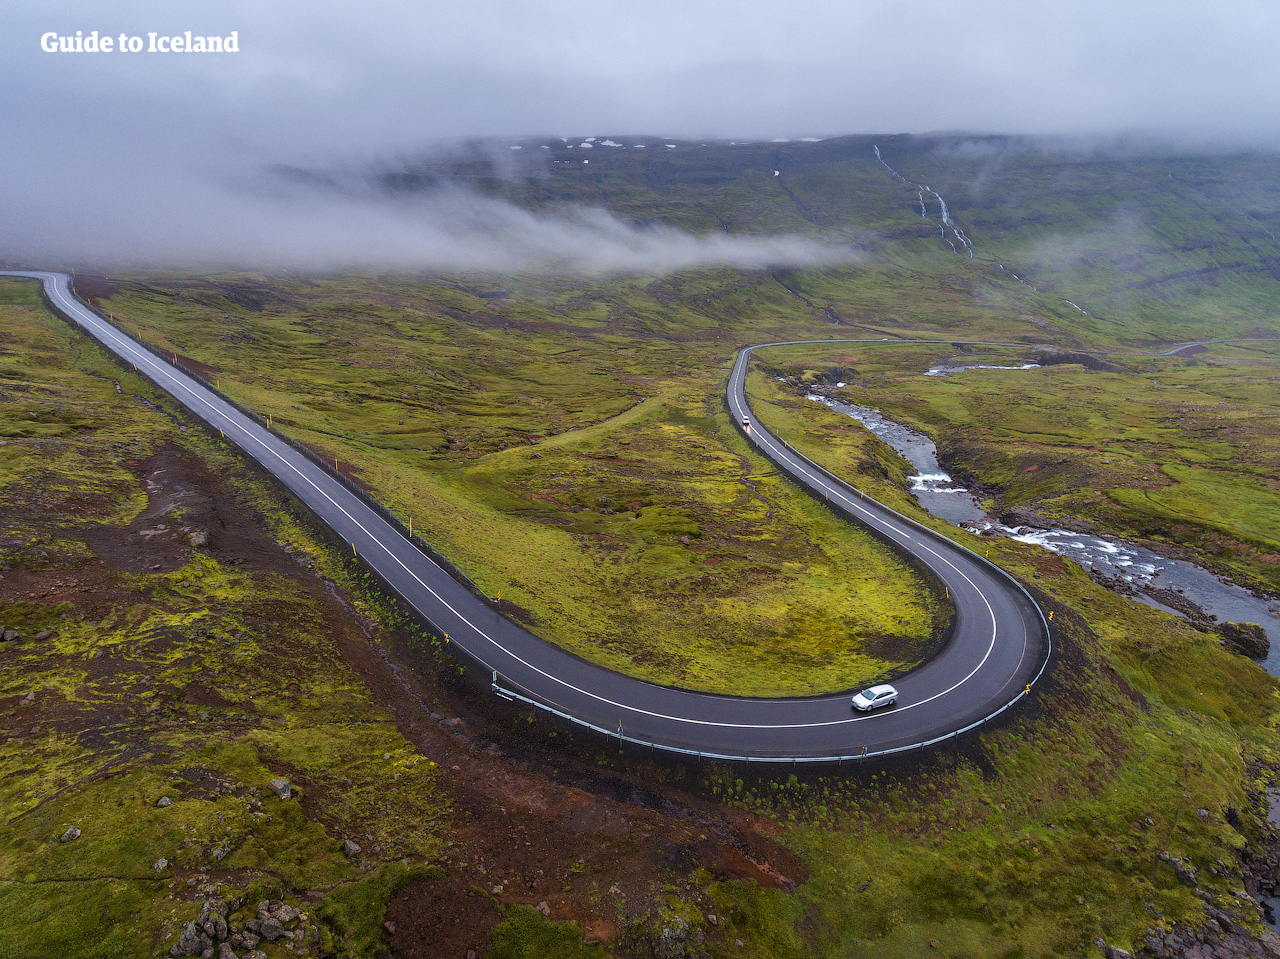 On a self-drive tour, you will have the freedom to explore Iceland at your own pace